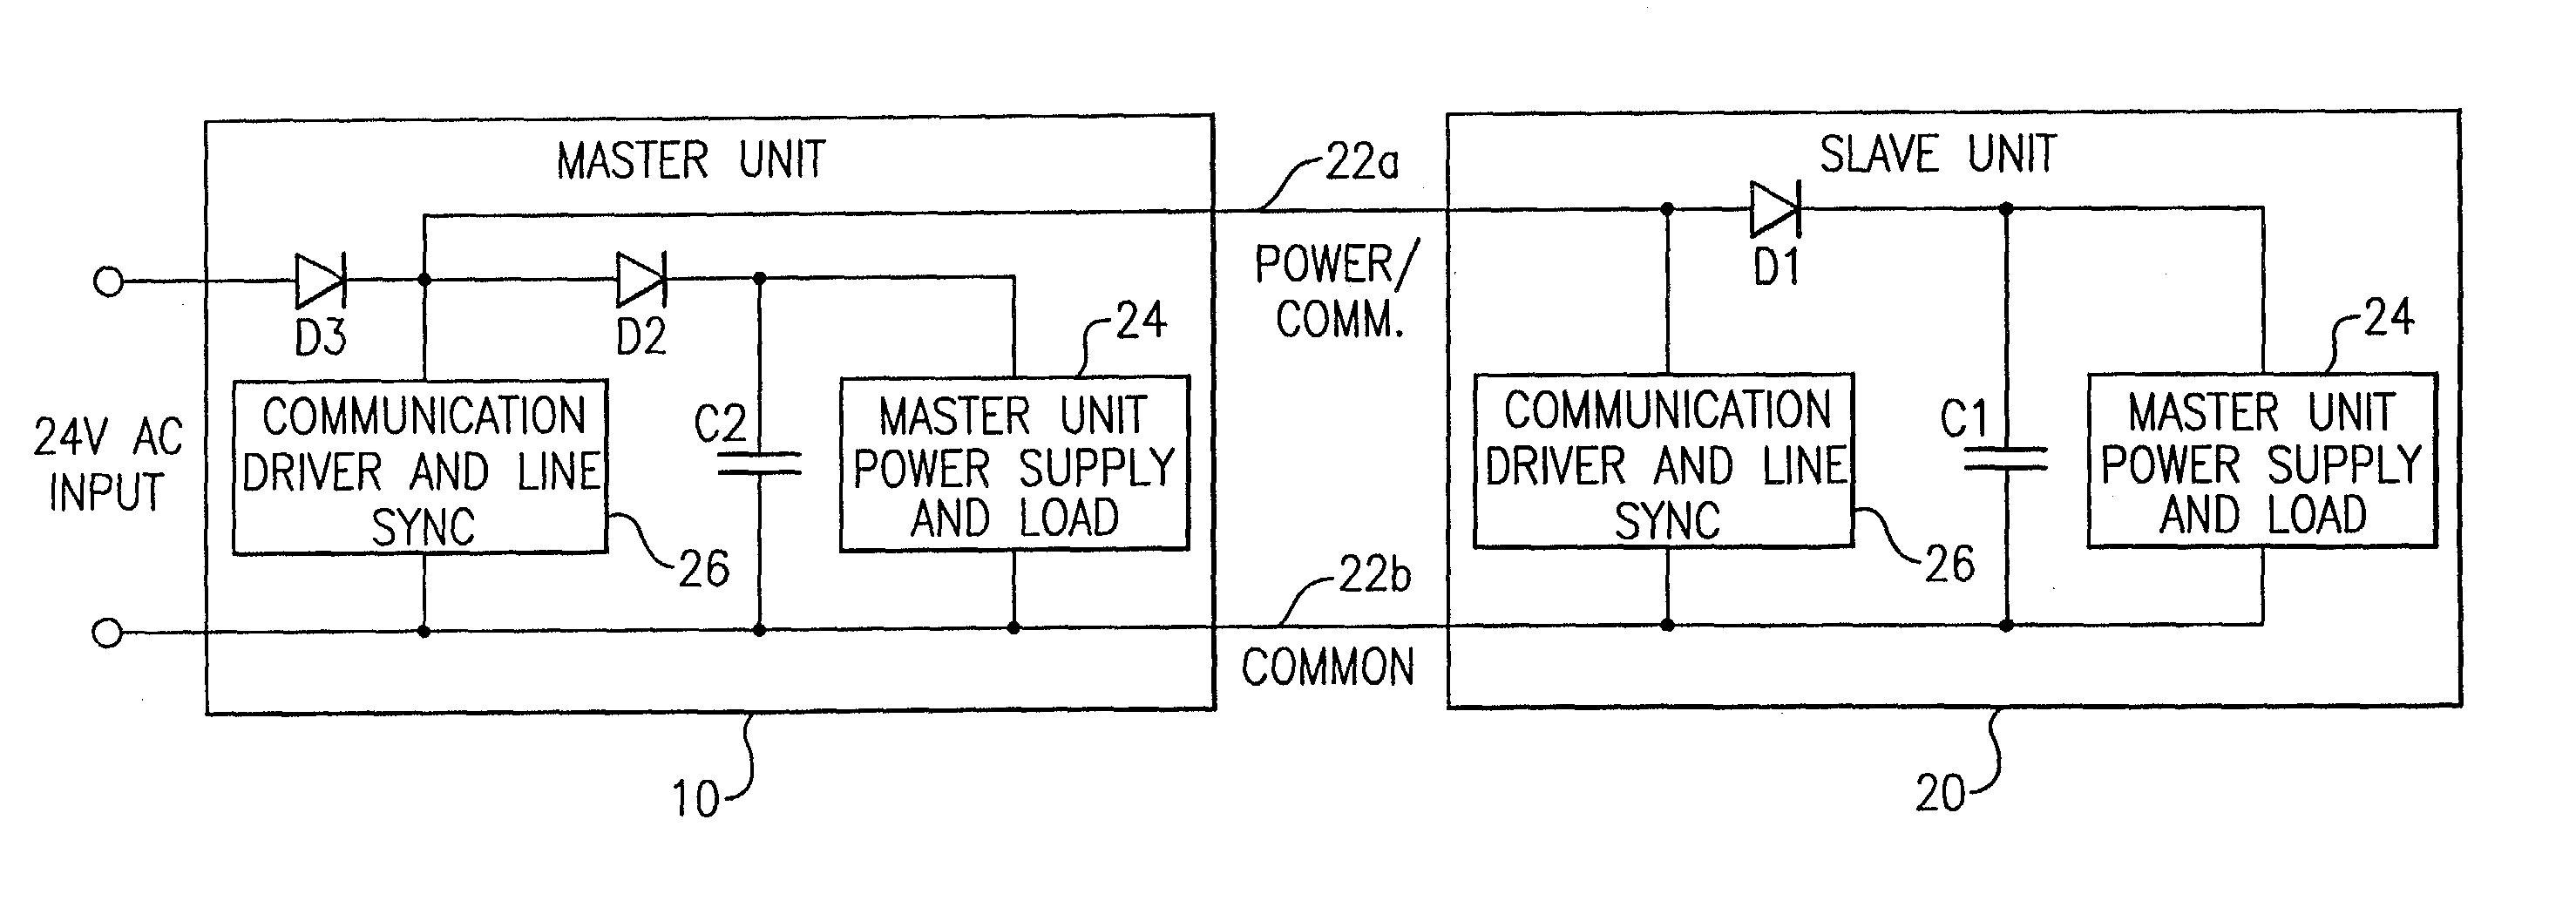 Method and apparatus for providing both power and communication over two wires between multiple low voltage AC devices